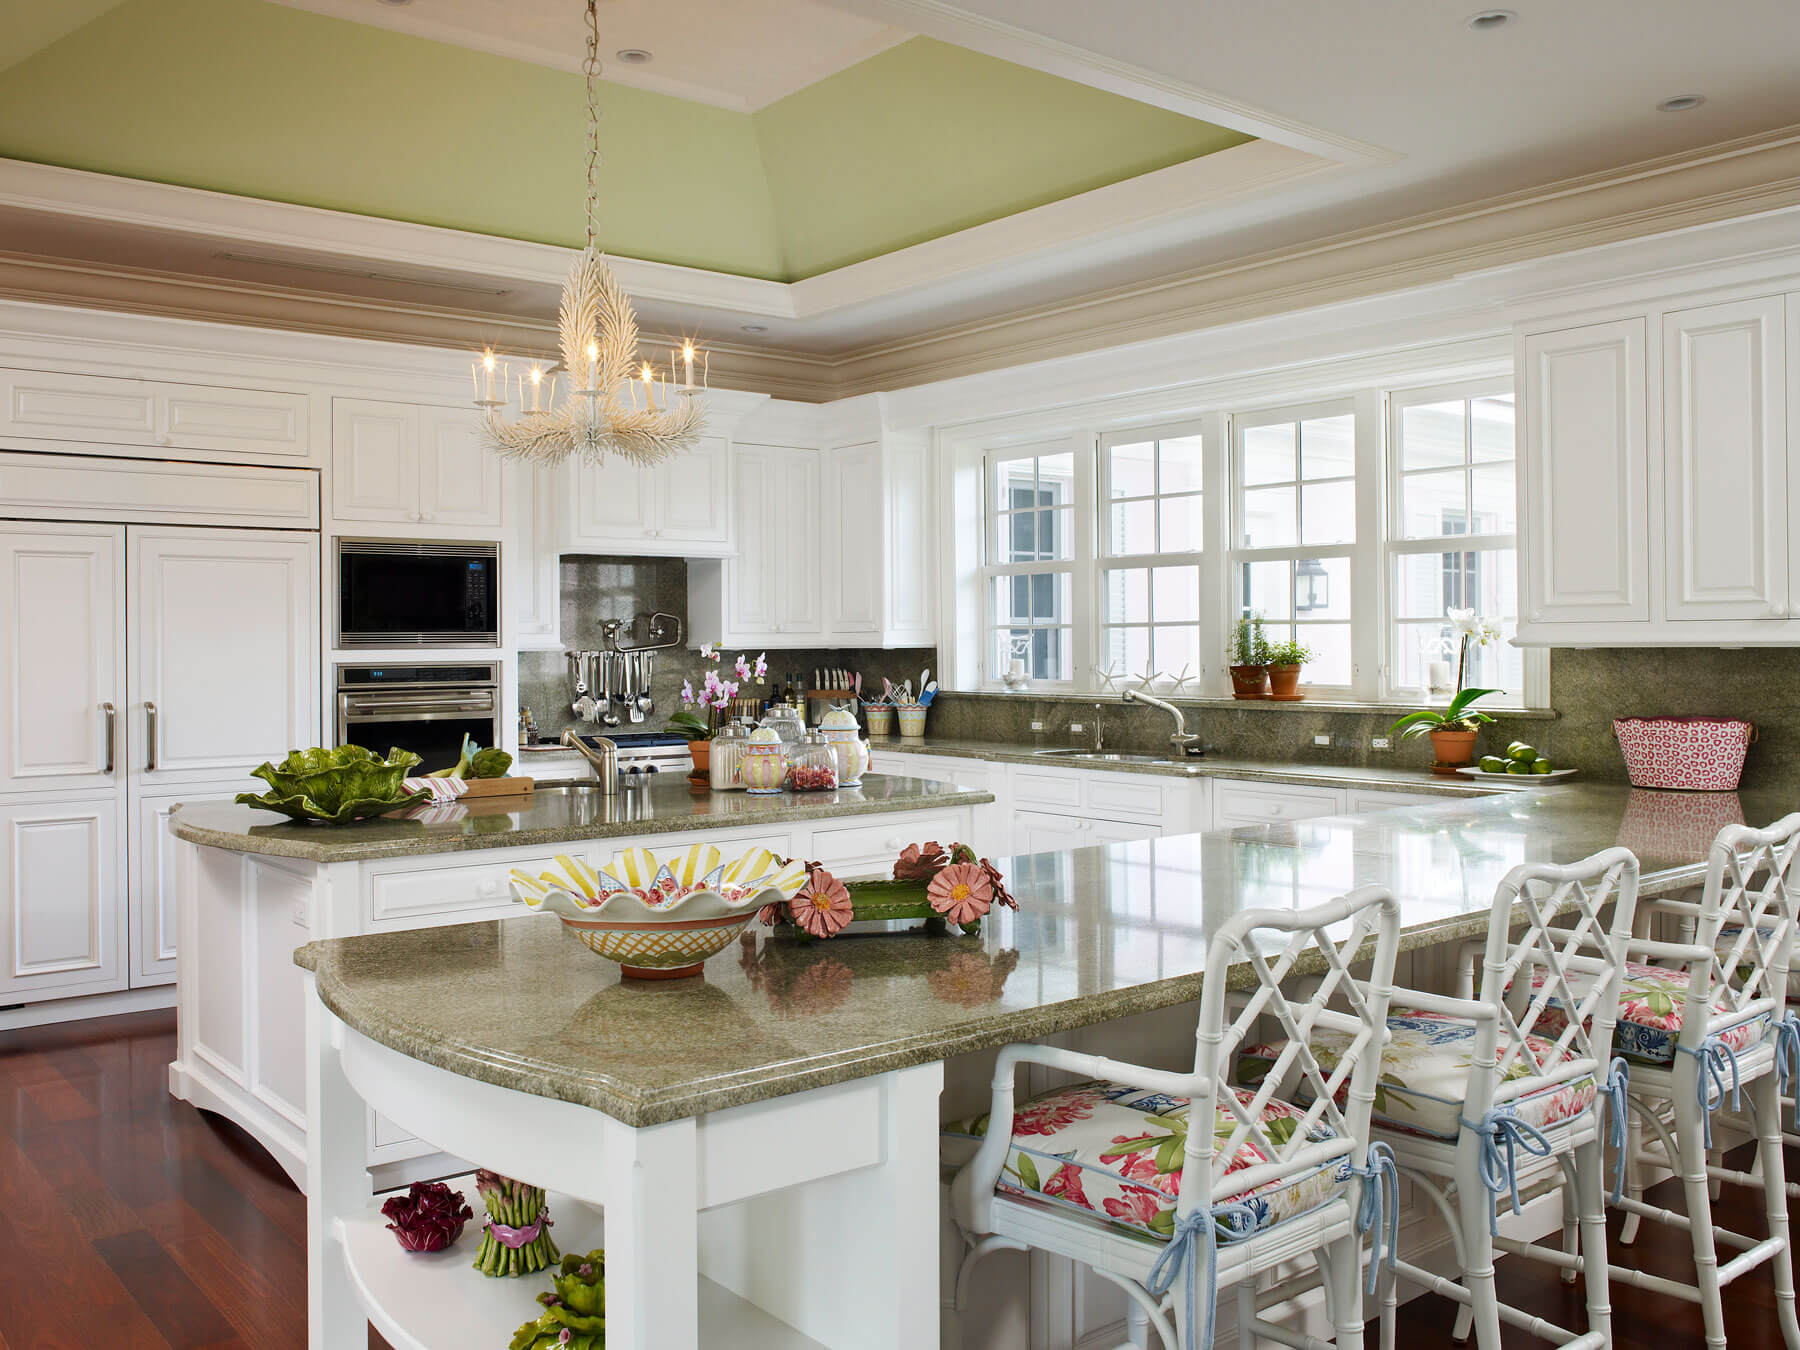 A kitchen with white cabinets and green counter tops.